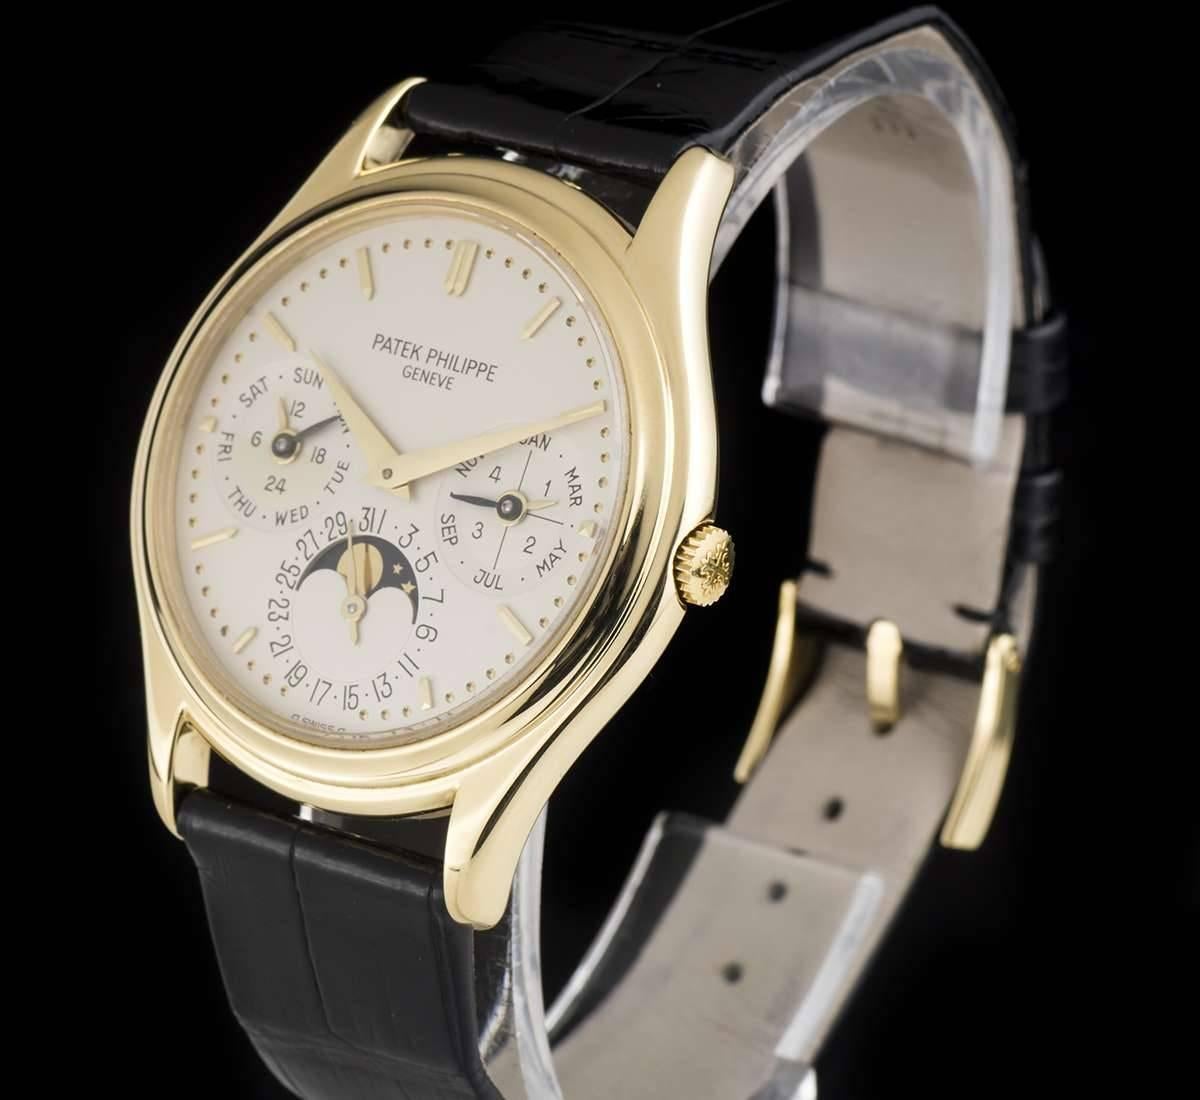 An 18k Yellow Gold Perpetual Calendar Gents Wristwatch, silver dial with applied hour markers, month and leap year indicator at 3 0'clock, date and moonphase aperture at 6 0'clock, weekday and am/pm indicator at 9 0'clock, a fixed 18k yellow gold